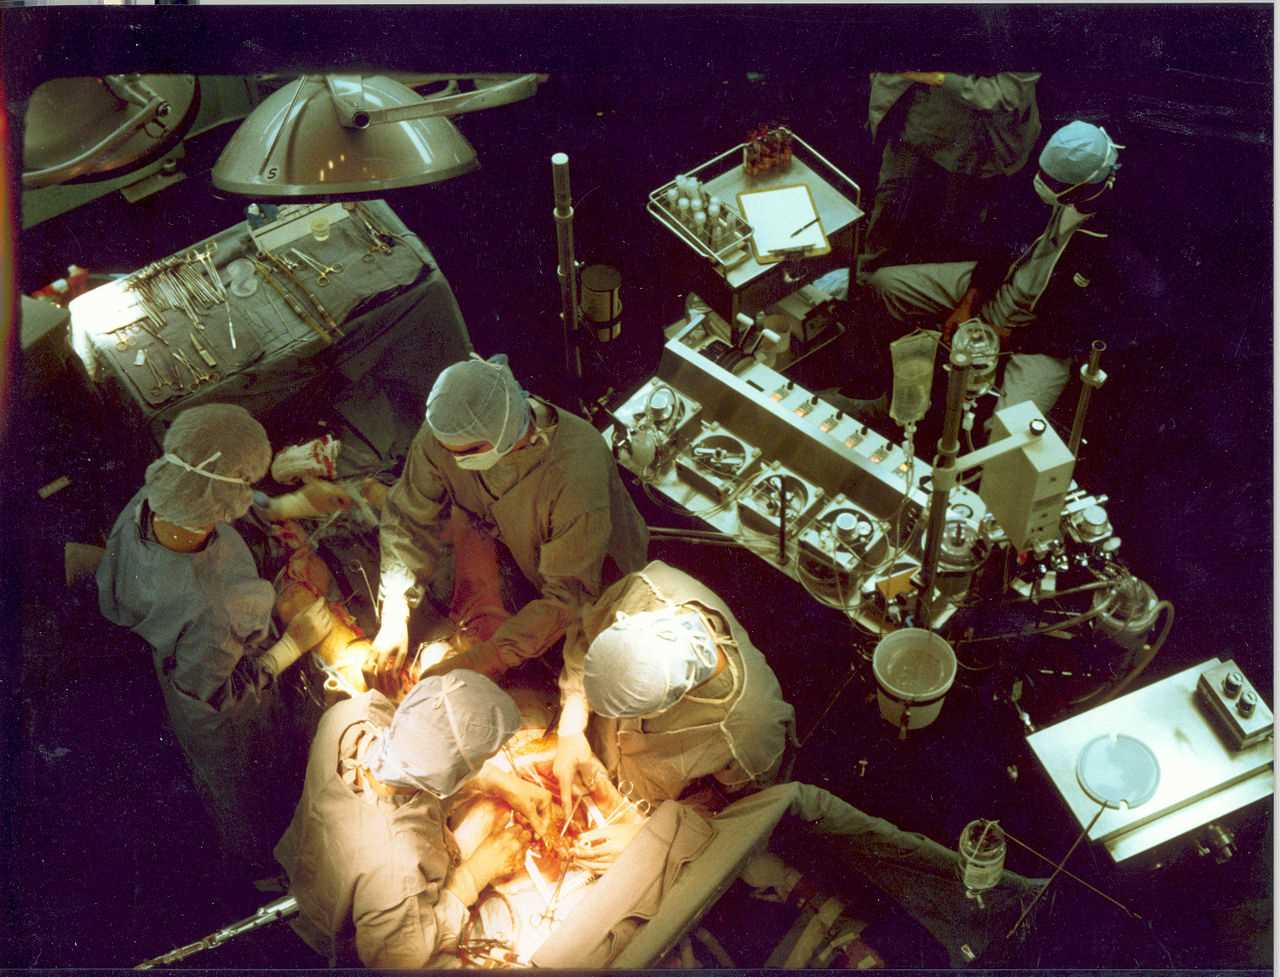 Early in a coronary artery bypass operation, during vein harvesting from the legs (left of image) and the establishment of cardiopulmonary bypass by placement of an aortic cannula (bottom of image)